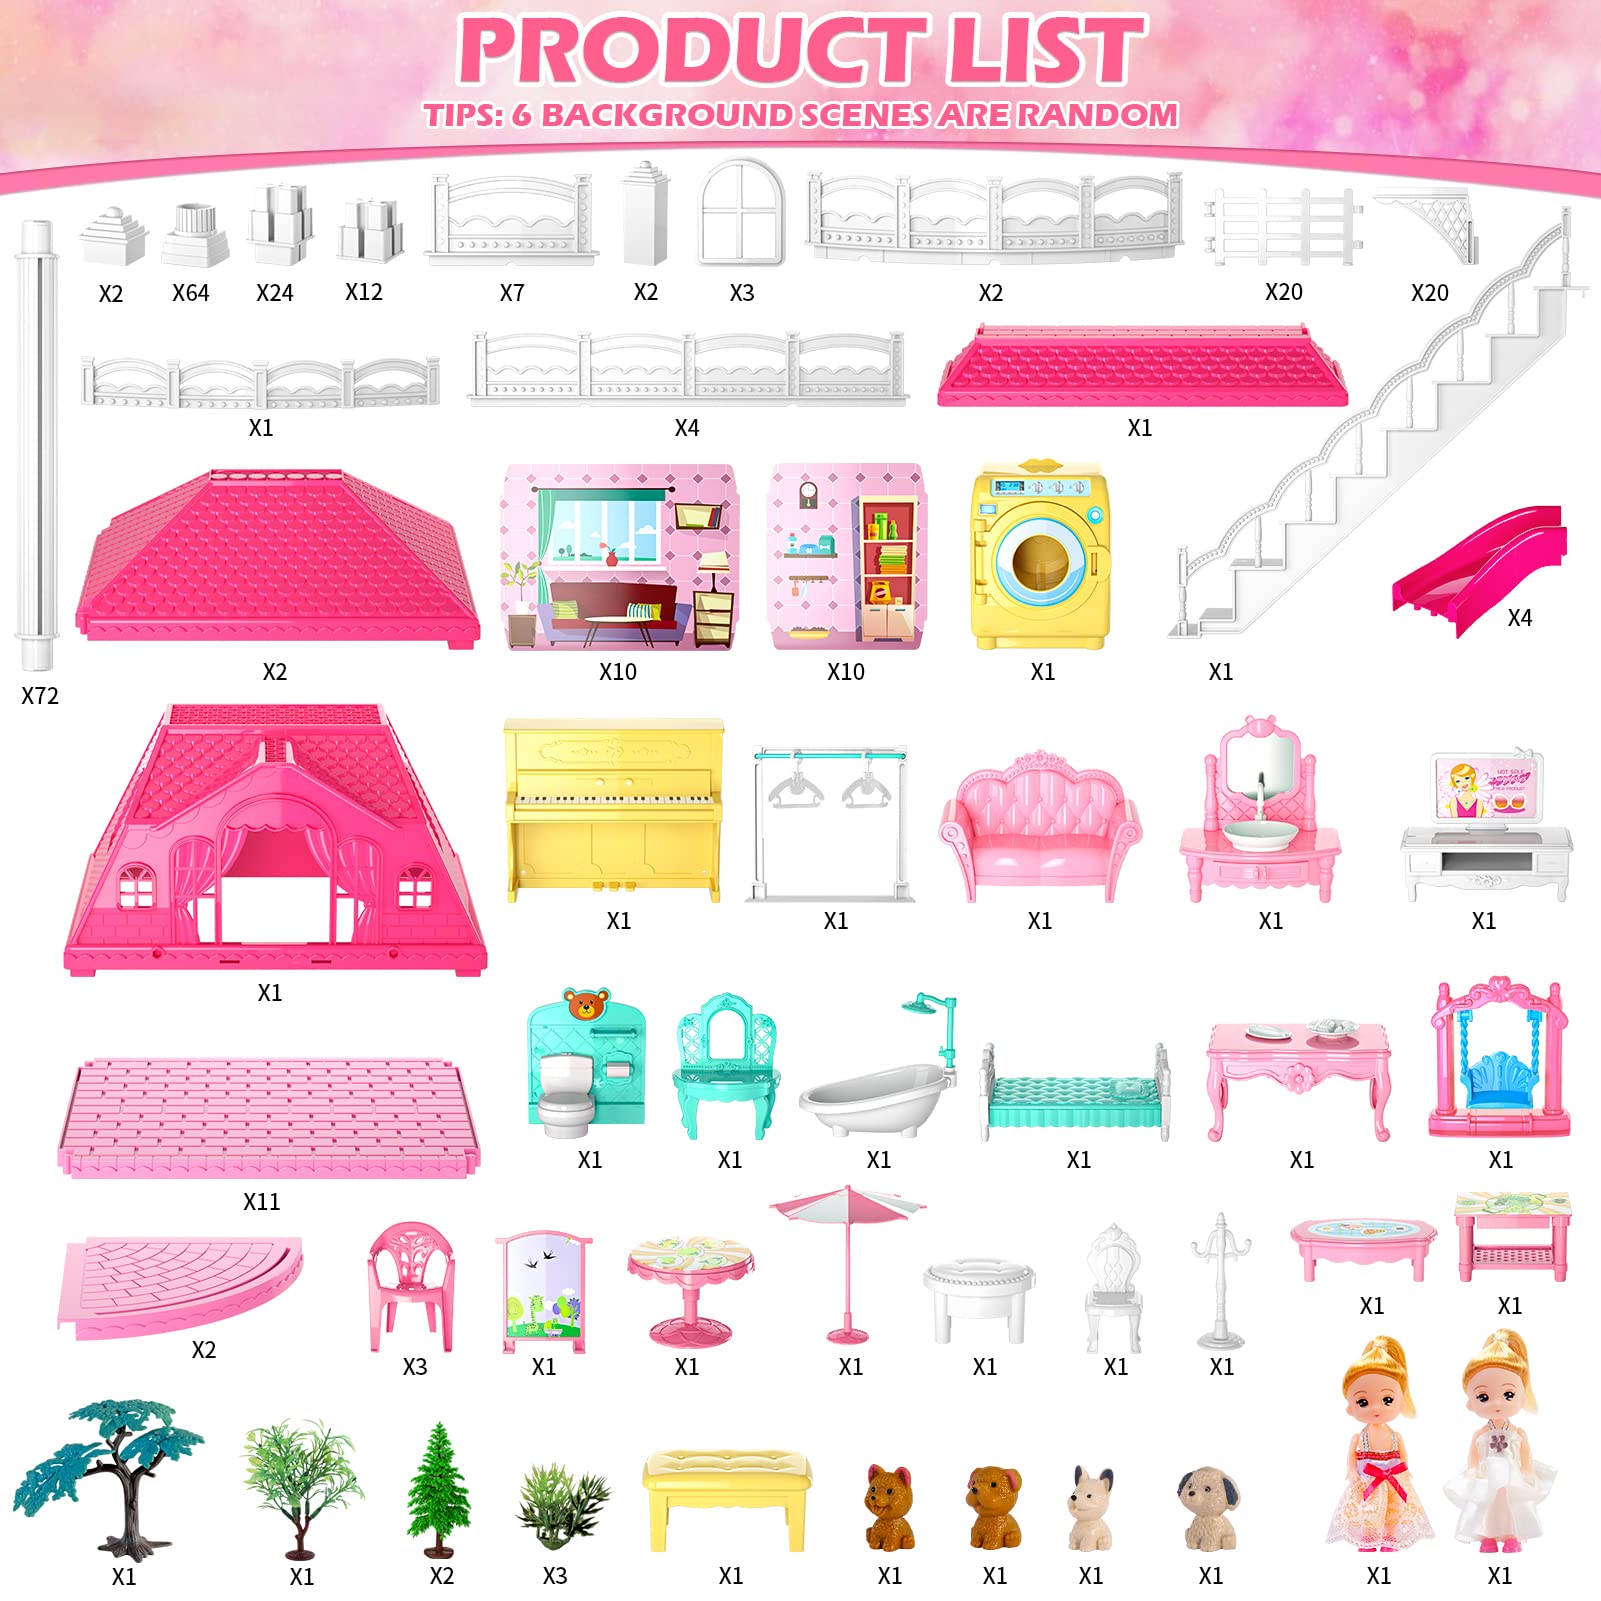 Doll House, Dream House Furniture Pink Girl Toys, 4 Stories 10 Rooms Dollhouse with 2 Princesses Slide Accessories, Toddler Playhouse Gift for for 3 4 5 6 7 8 9 10 Year Old Girls Toys